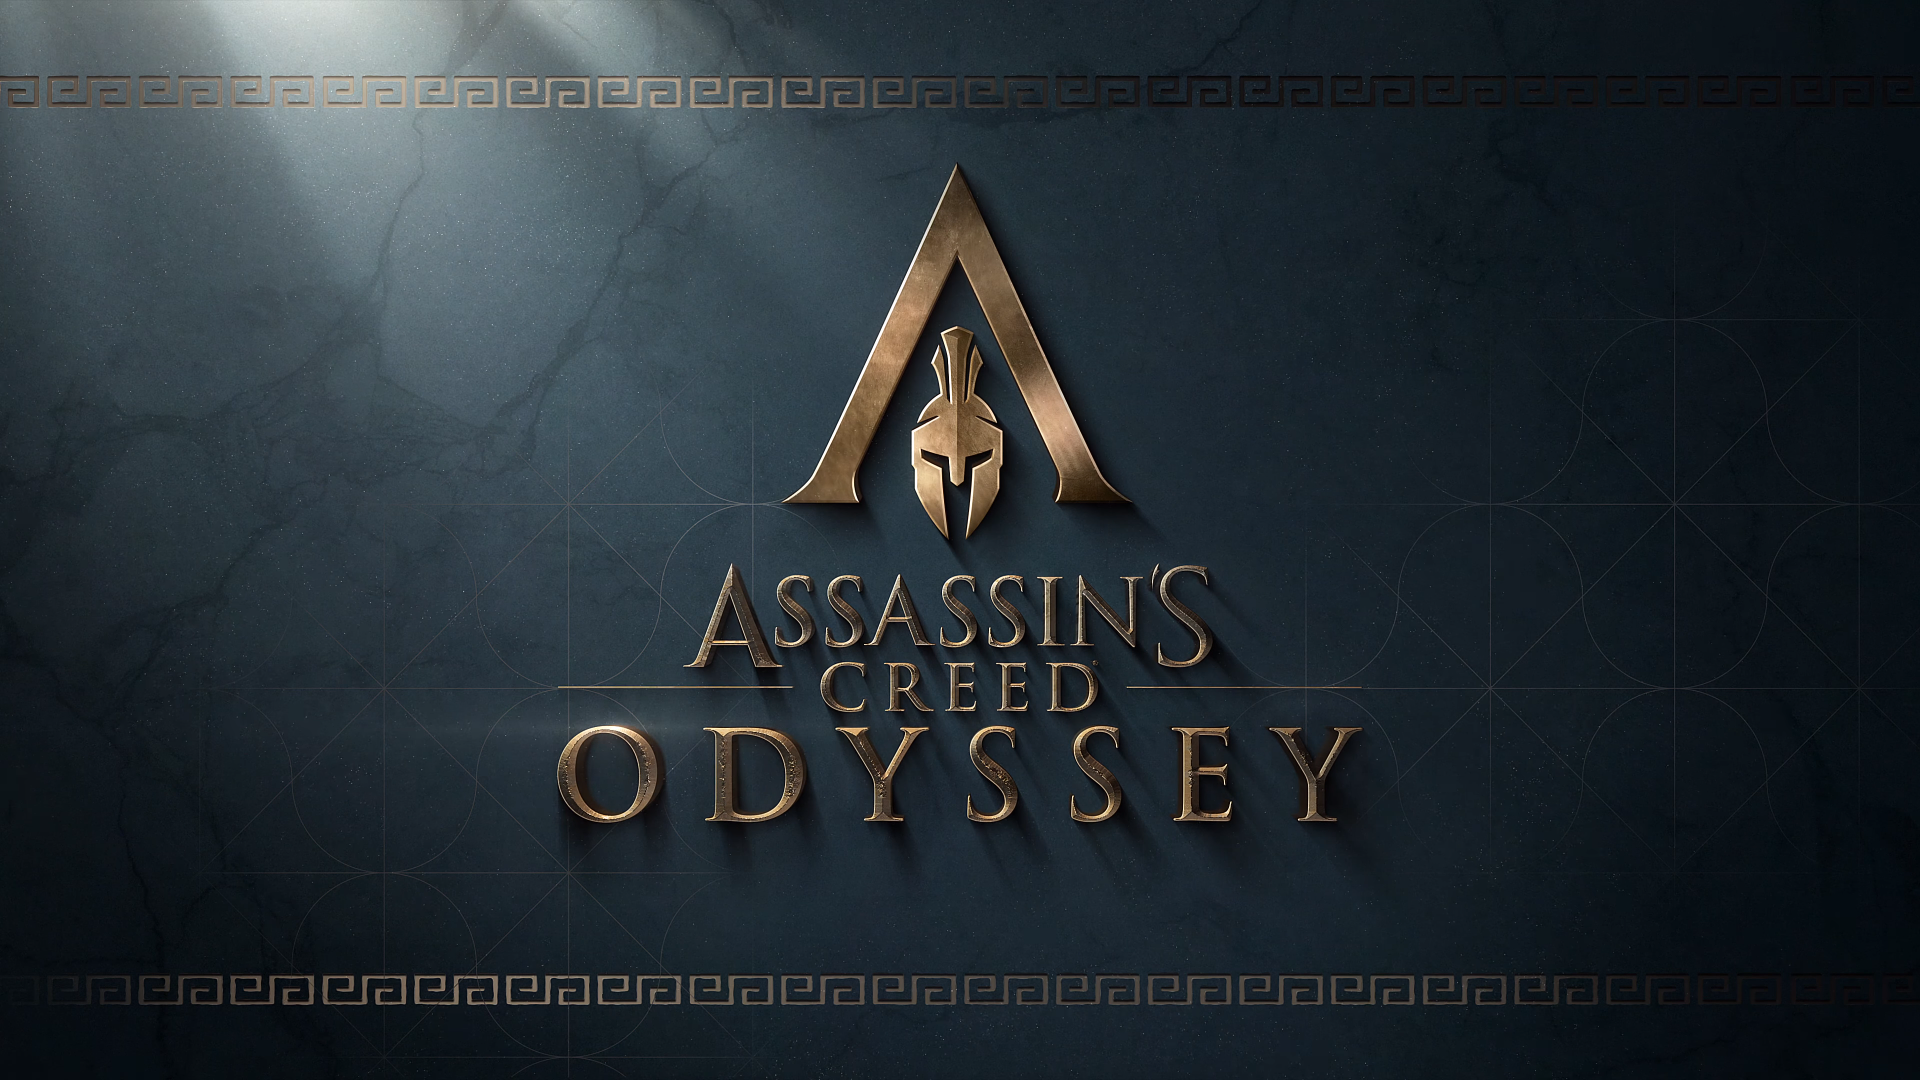 General 1920x1080 Assassin's Creed Greece mythology ancient greece Spartans video game art video games game logo logo gold Assassin's Creed: Odyssey